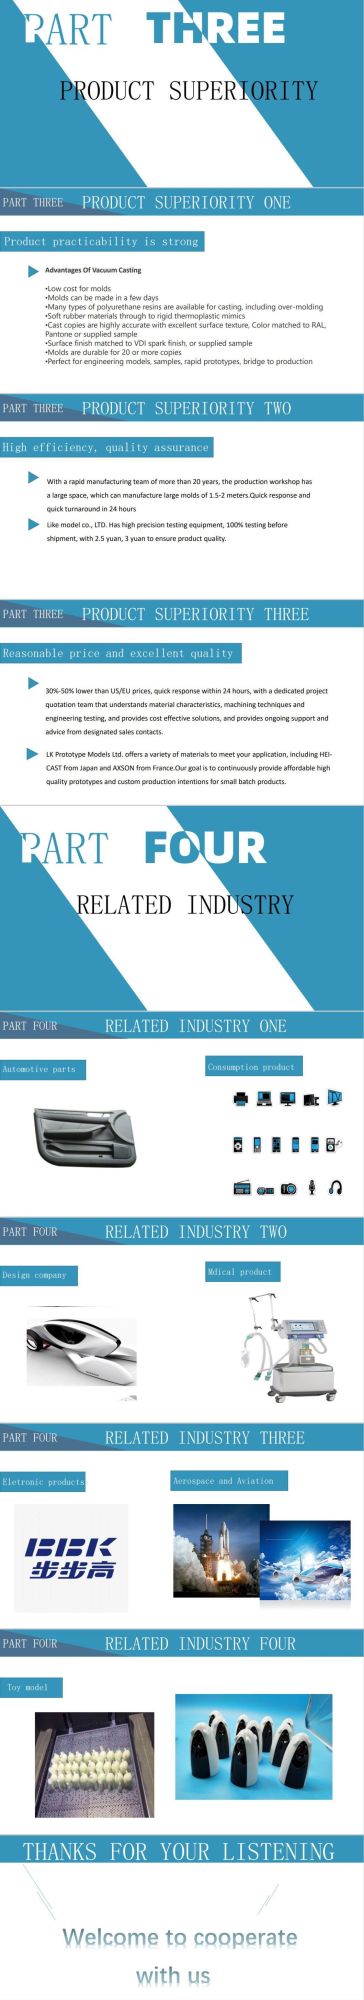 High Quality Metal Stamping/Aluminum/Stamping Parts/Metal Parts for Furniture Machining Part